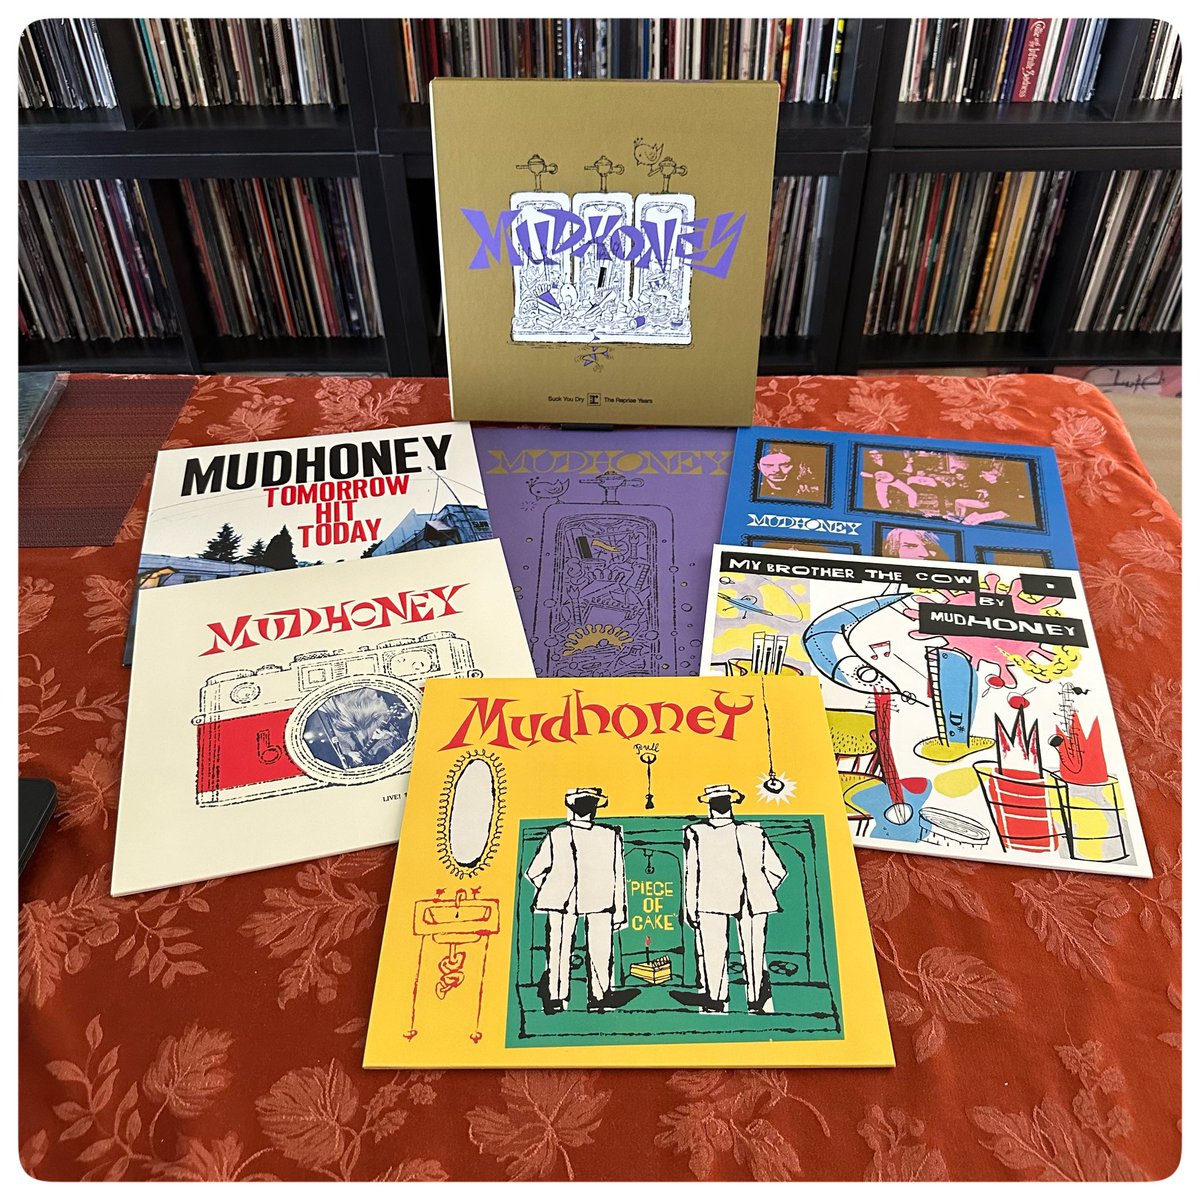 Lost my mind
Digging a hole
Bury a heart
Bury my soul

Dead Love (live) by #Mudhoney from Live! 1993-1998 in the Suck You Dry: The Reprise Years as featured on Riff Haven Episode 372
 
#RiffHaven #vinyloftheday #RecordoftheDay #VinylRecords #RepriseRecords #RecordStoreDay